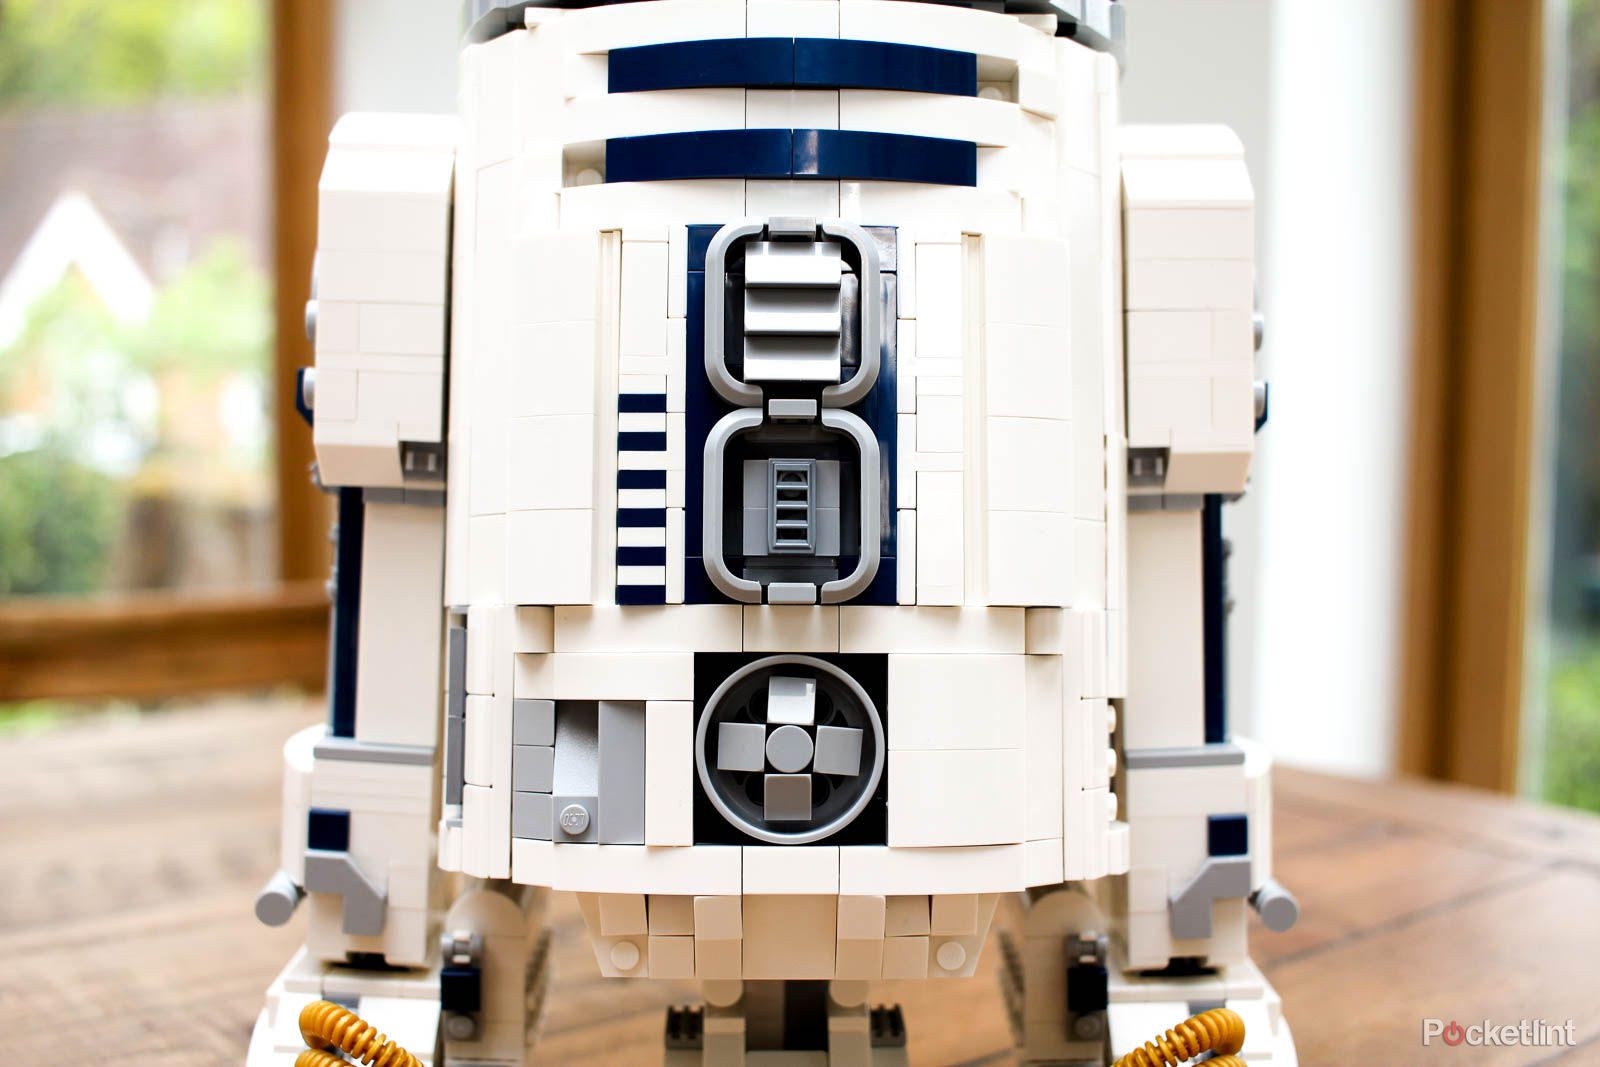 Lego R2-D2 hands on build pictures photo 10